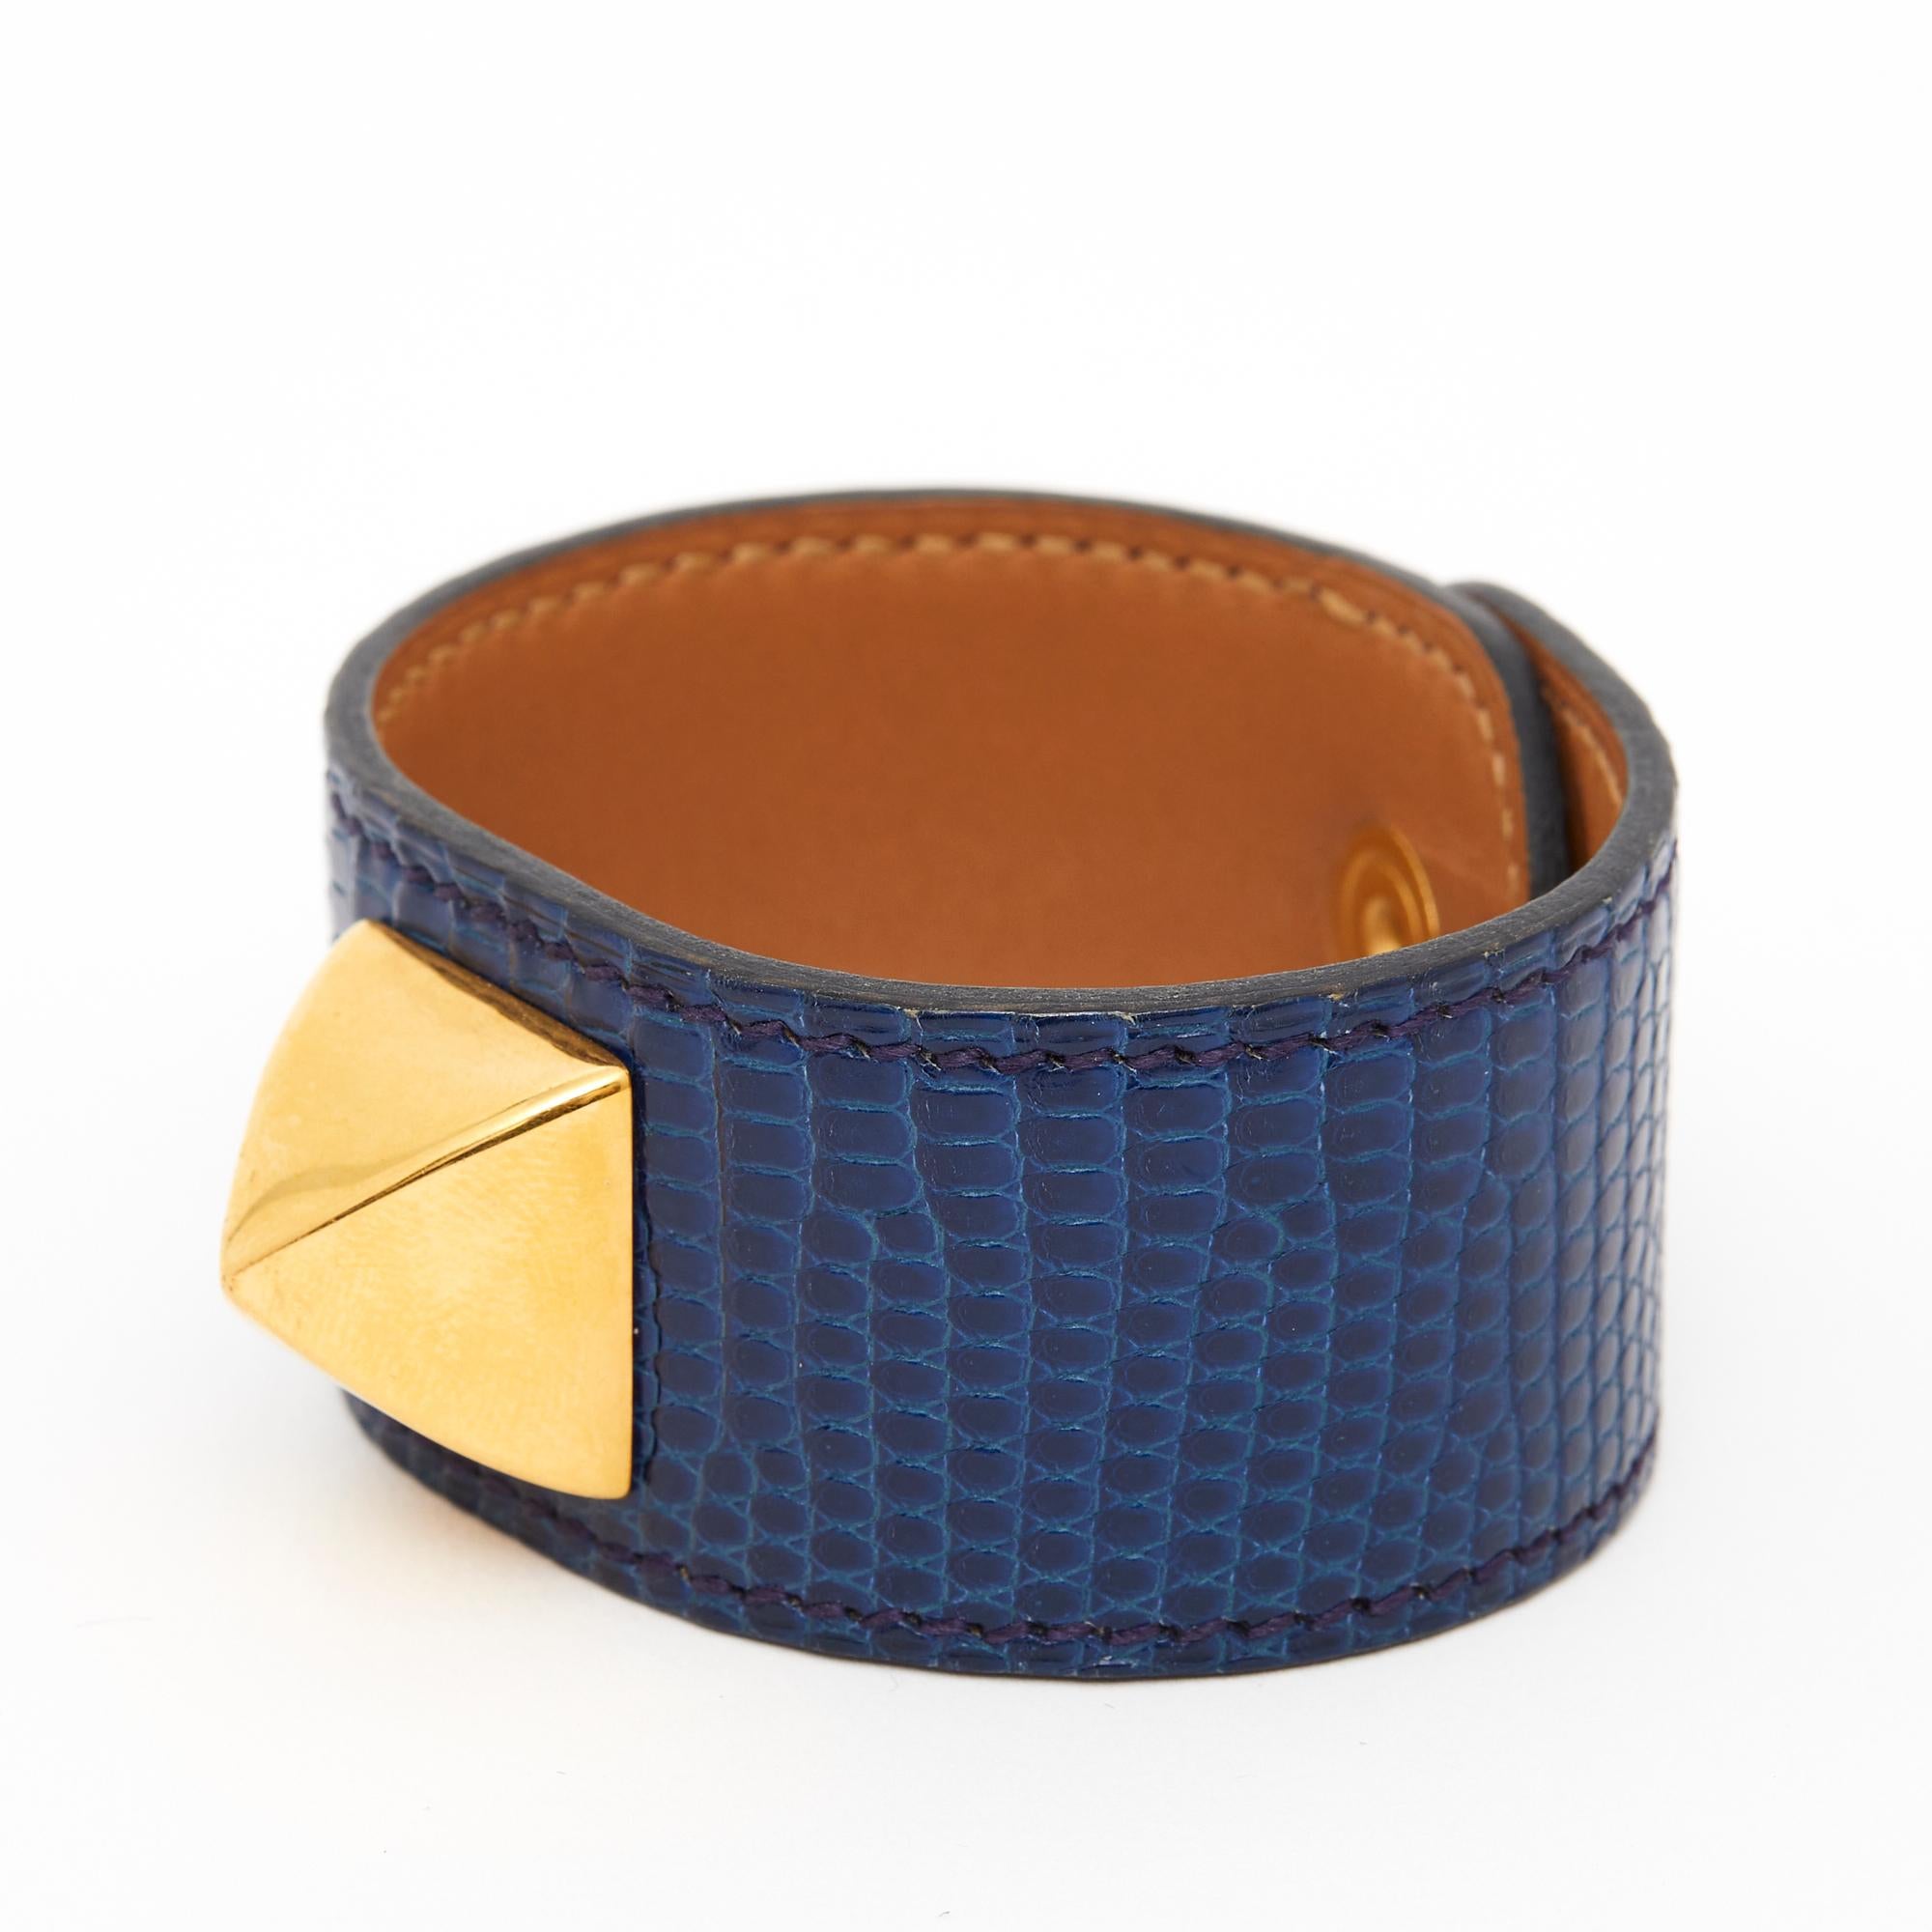 Hermès Médor model bracelet in lustrous oil-colored lizard adorned with a diamond-point stud in gold metal, fitted to the wrist with a saddle nail-style snap closure. Length 17.2 cm, Height 2.8 cm. Apart from the slightly scratched pressure, the